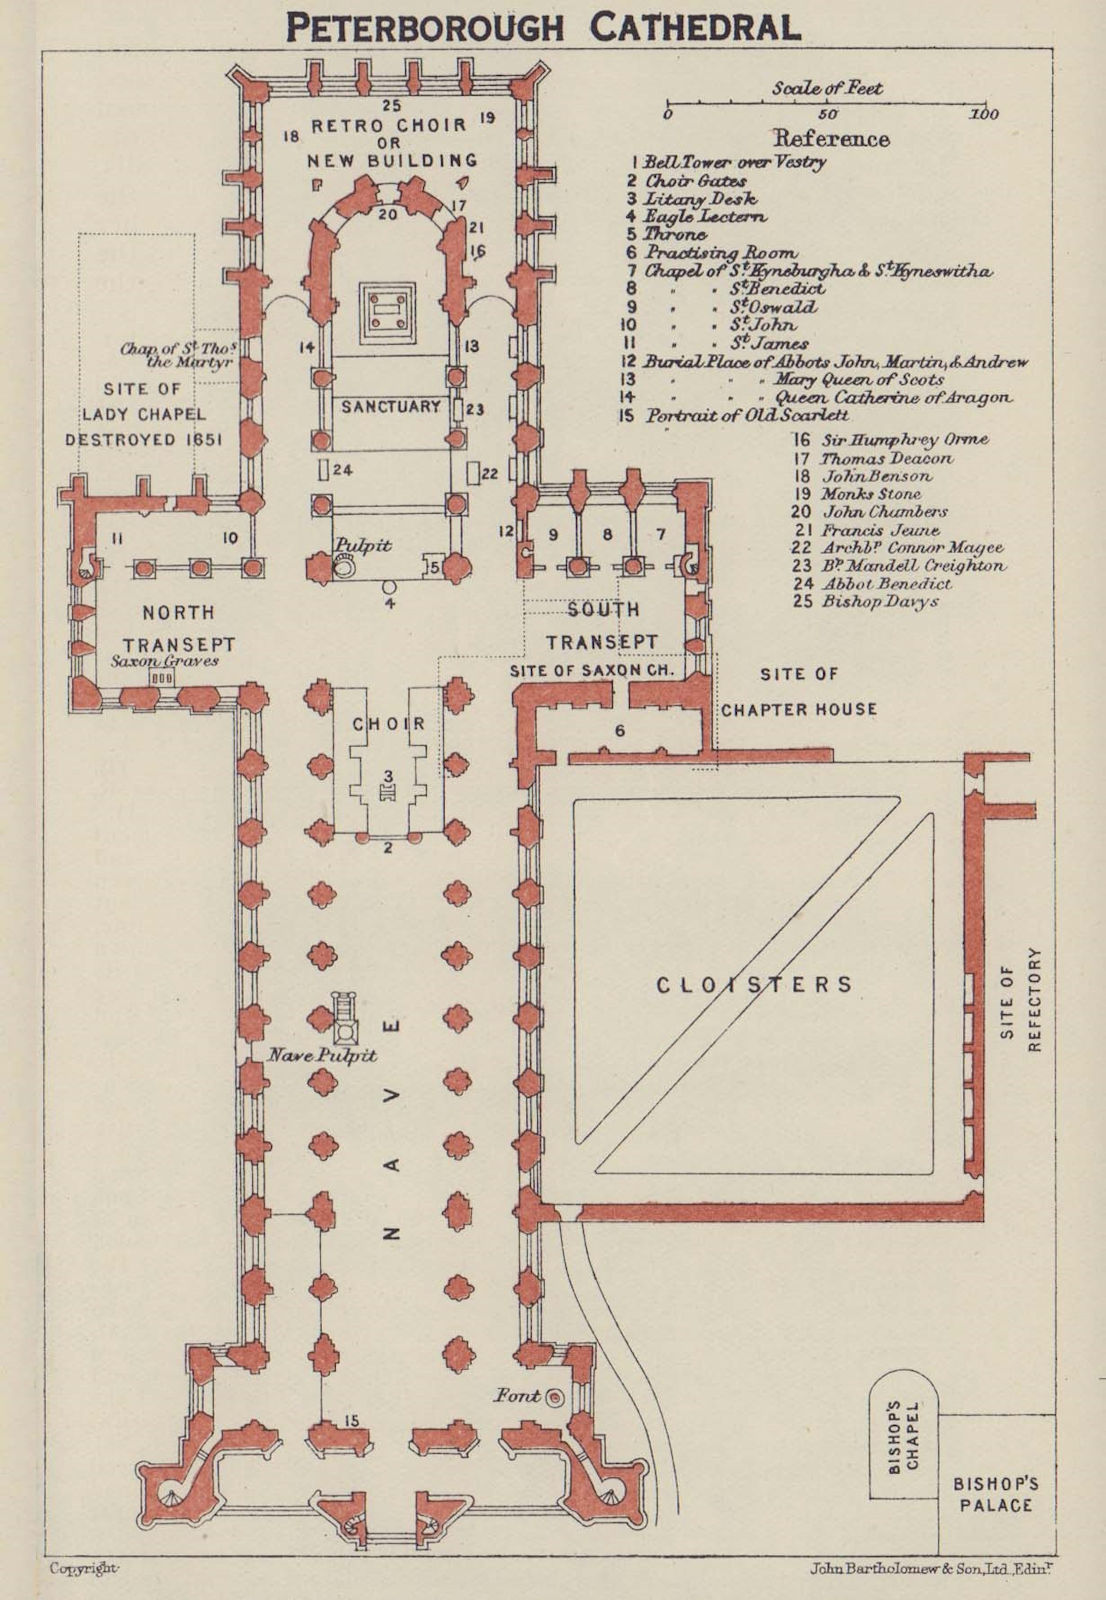 Associate Product Peterborough Cathedral ground floor plan. Northamptonshire 1920 old map